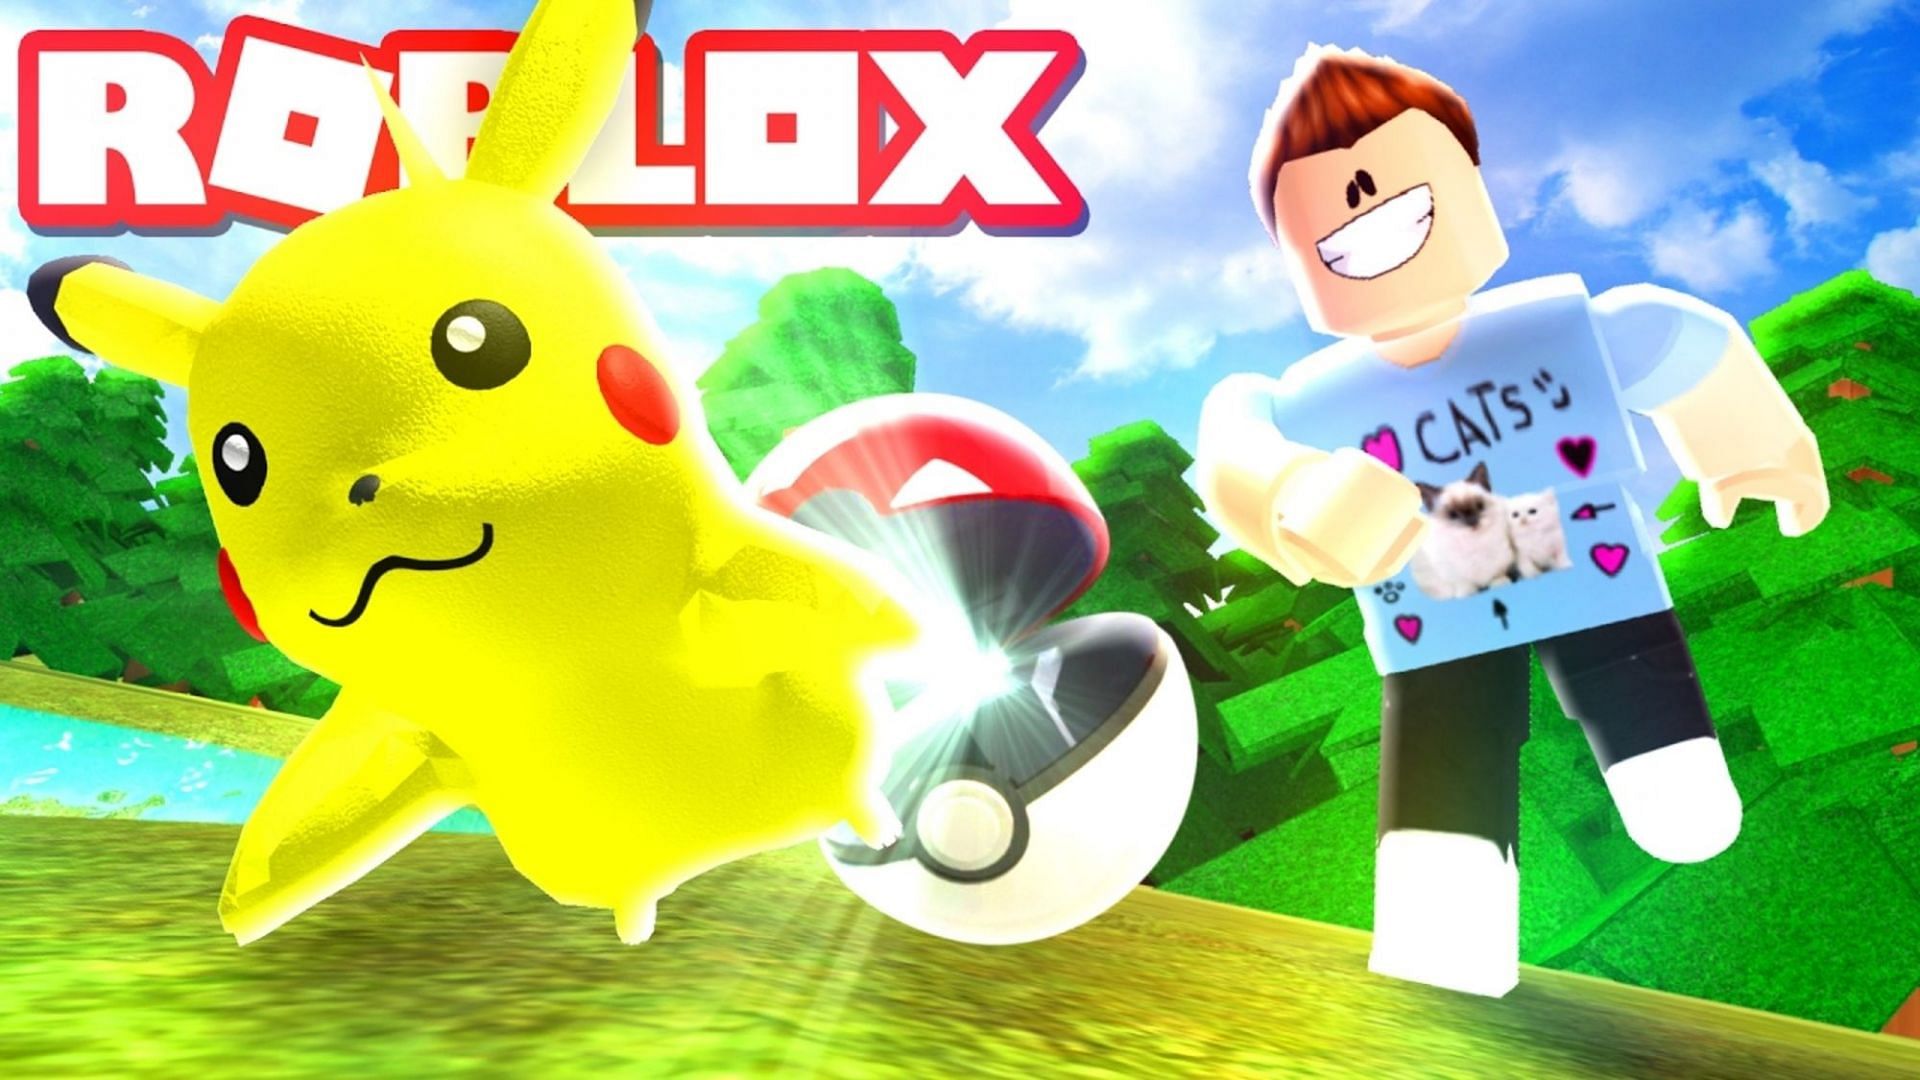 Players must check out these exciting Pokemon Roblox games (Image via Roblox)